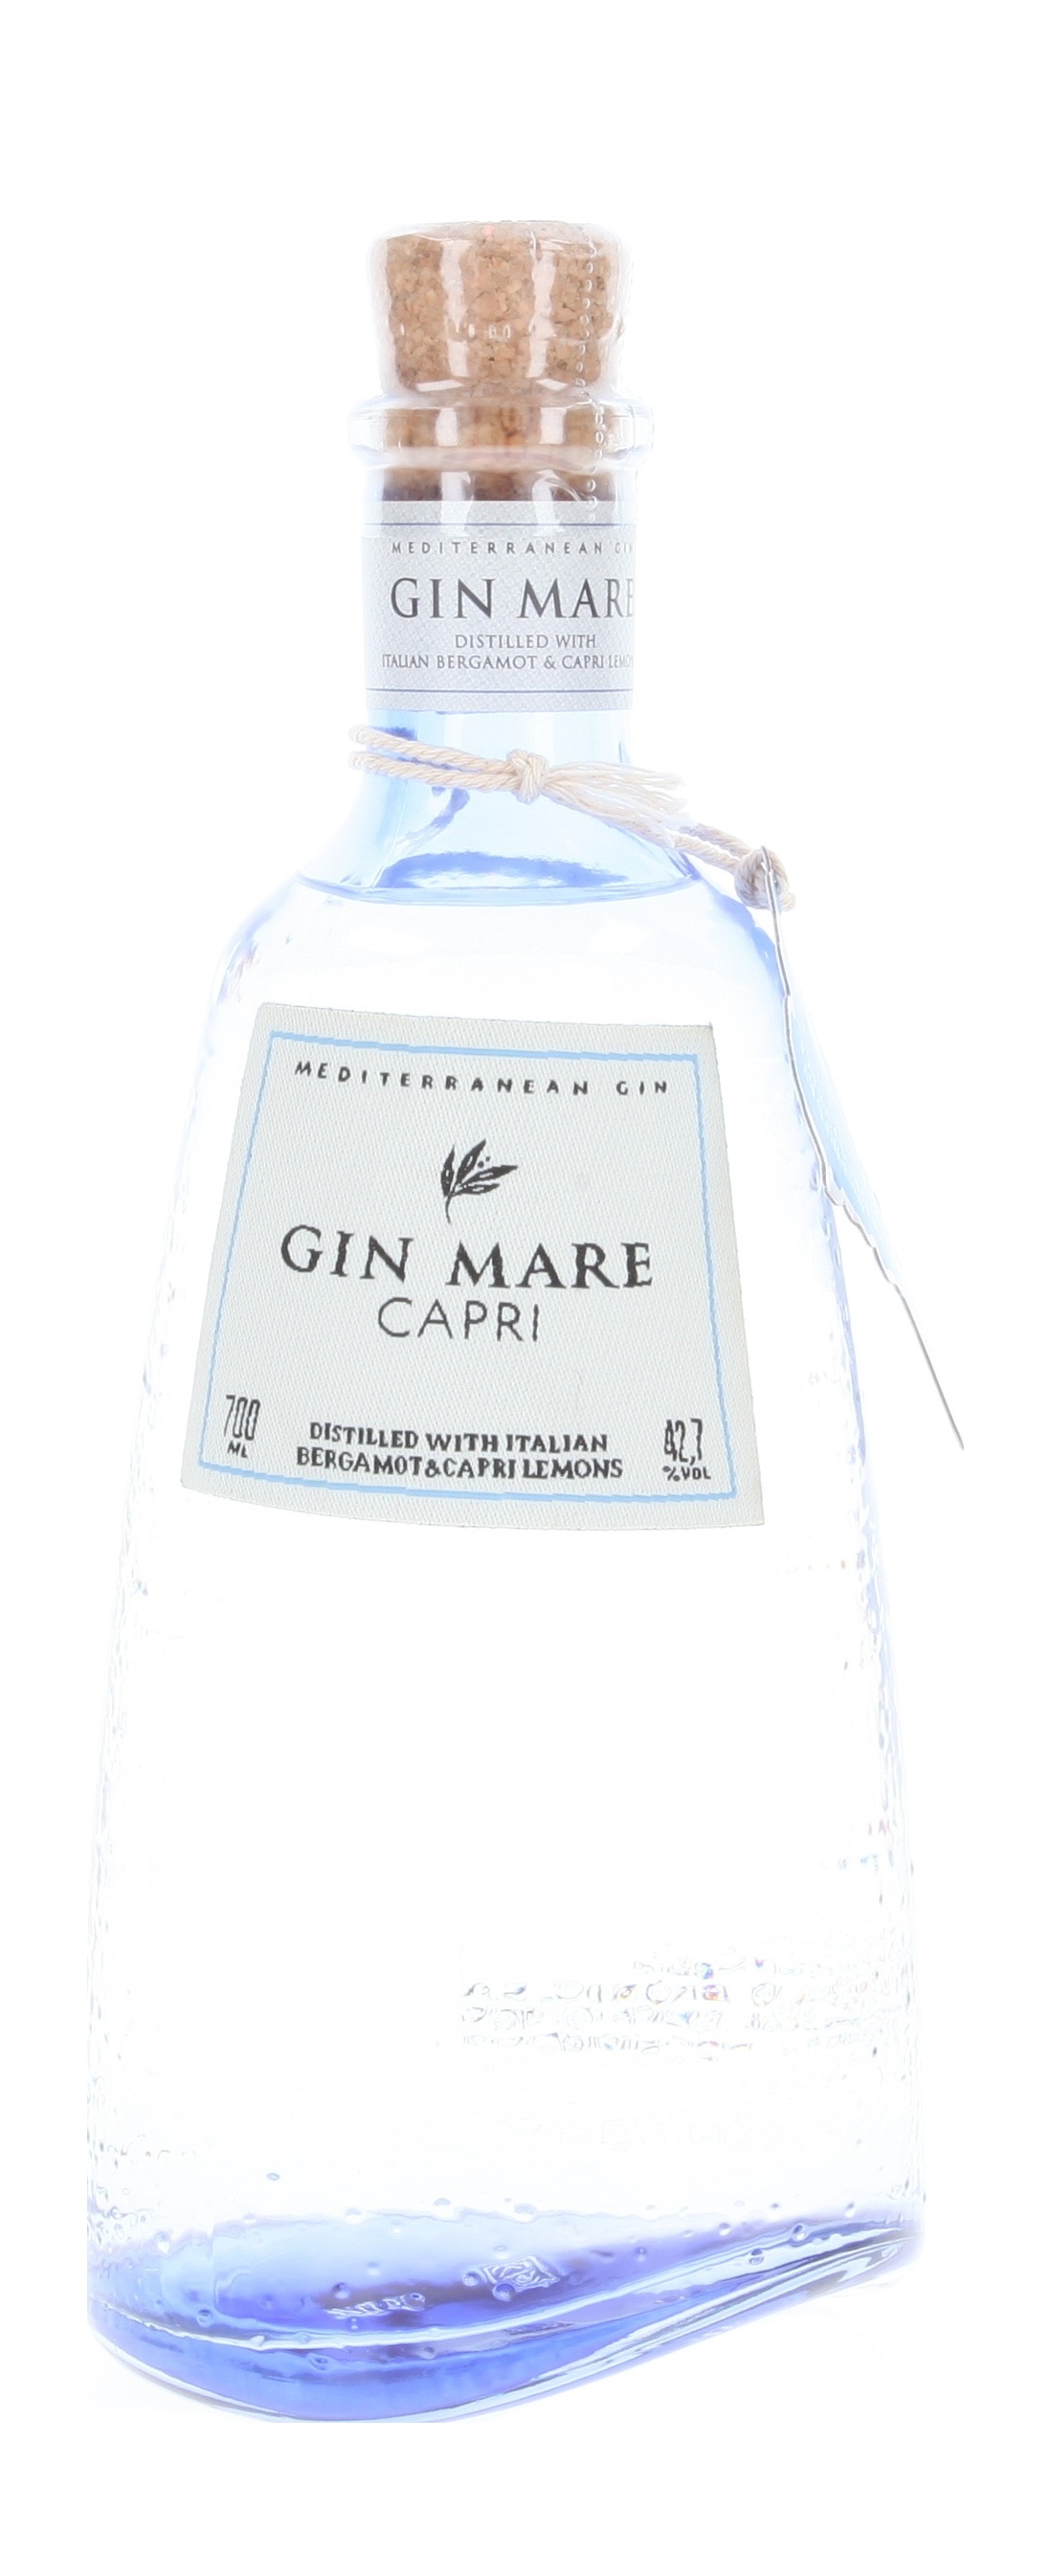 Gin Mare Capri | online To the store » Whisky.de